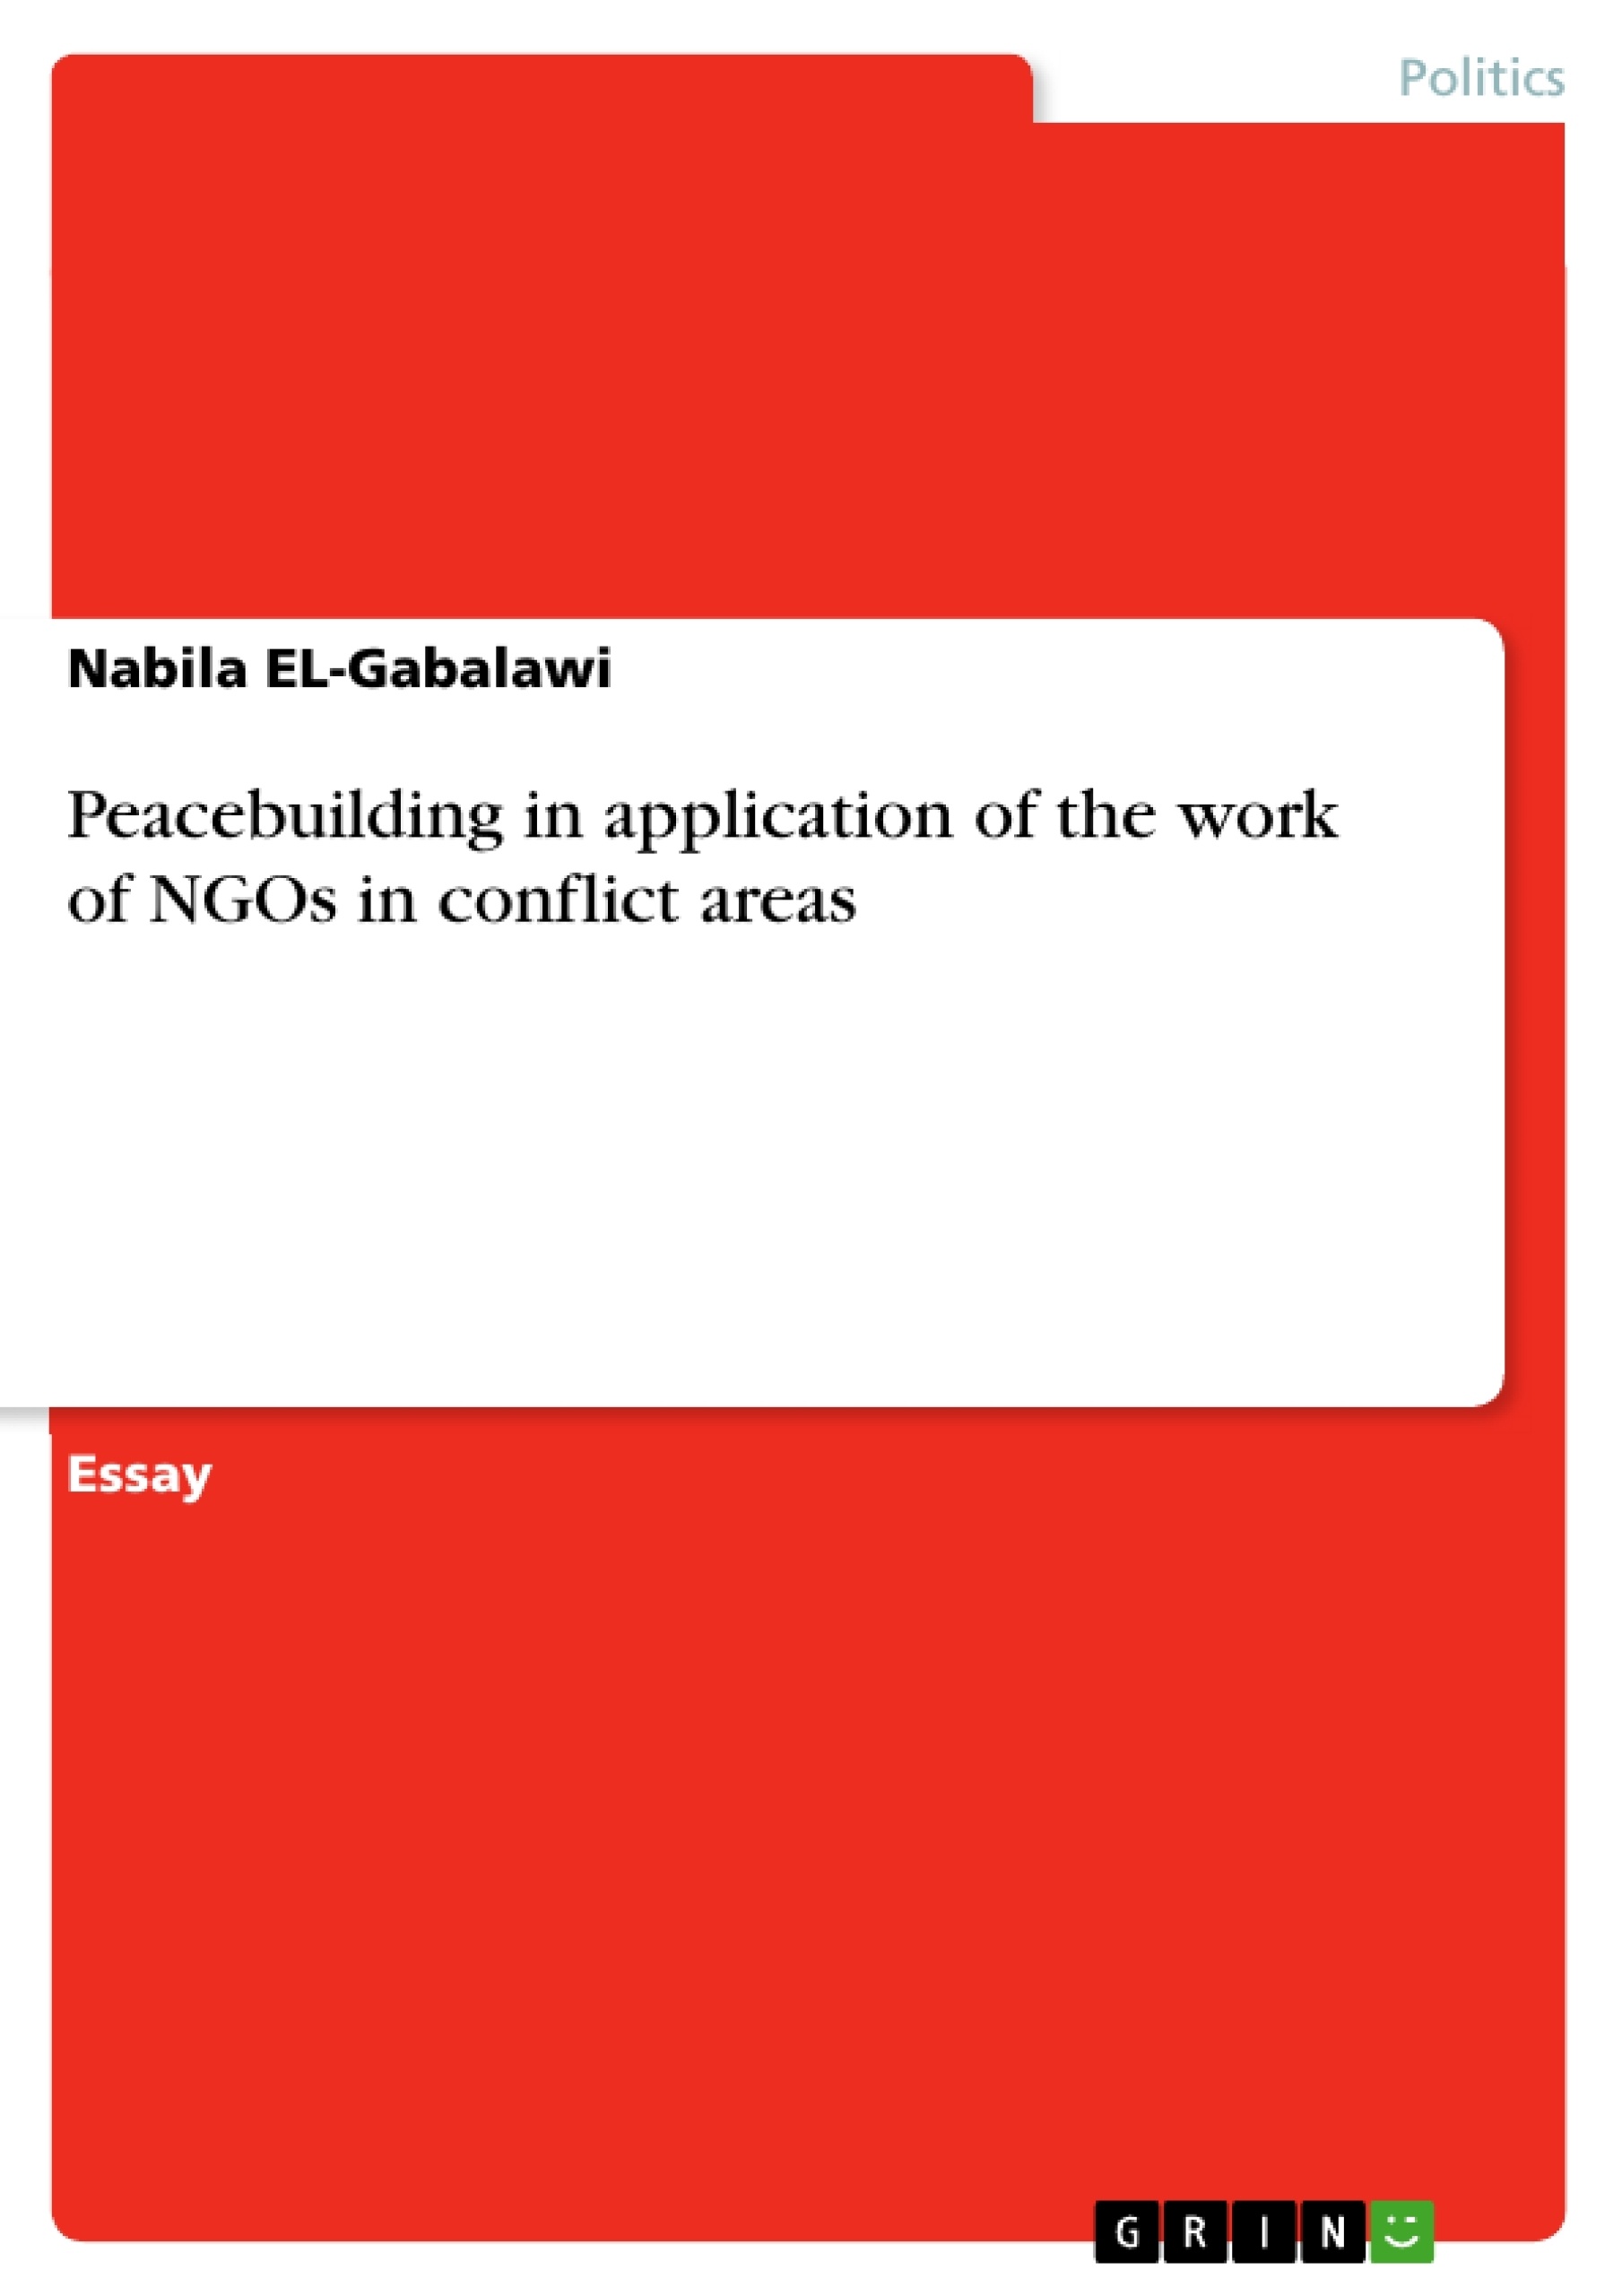 Title: Peacebuilding in application of the work of NGOs in conflict areas